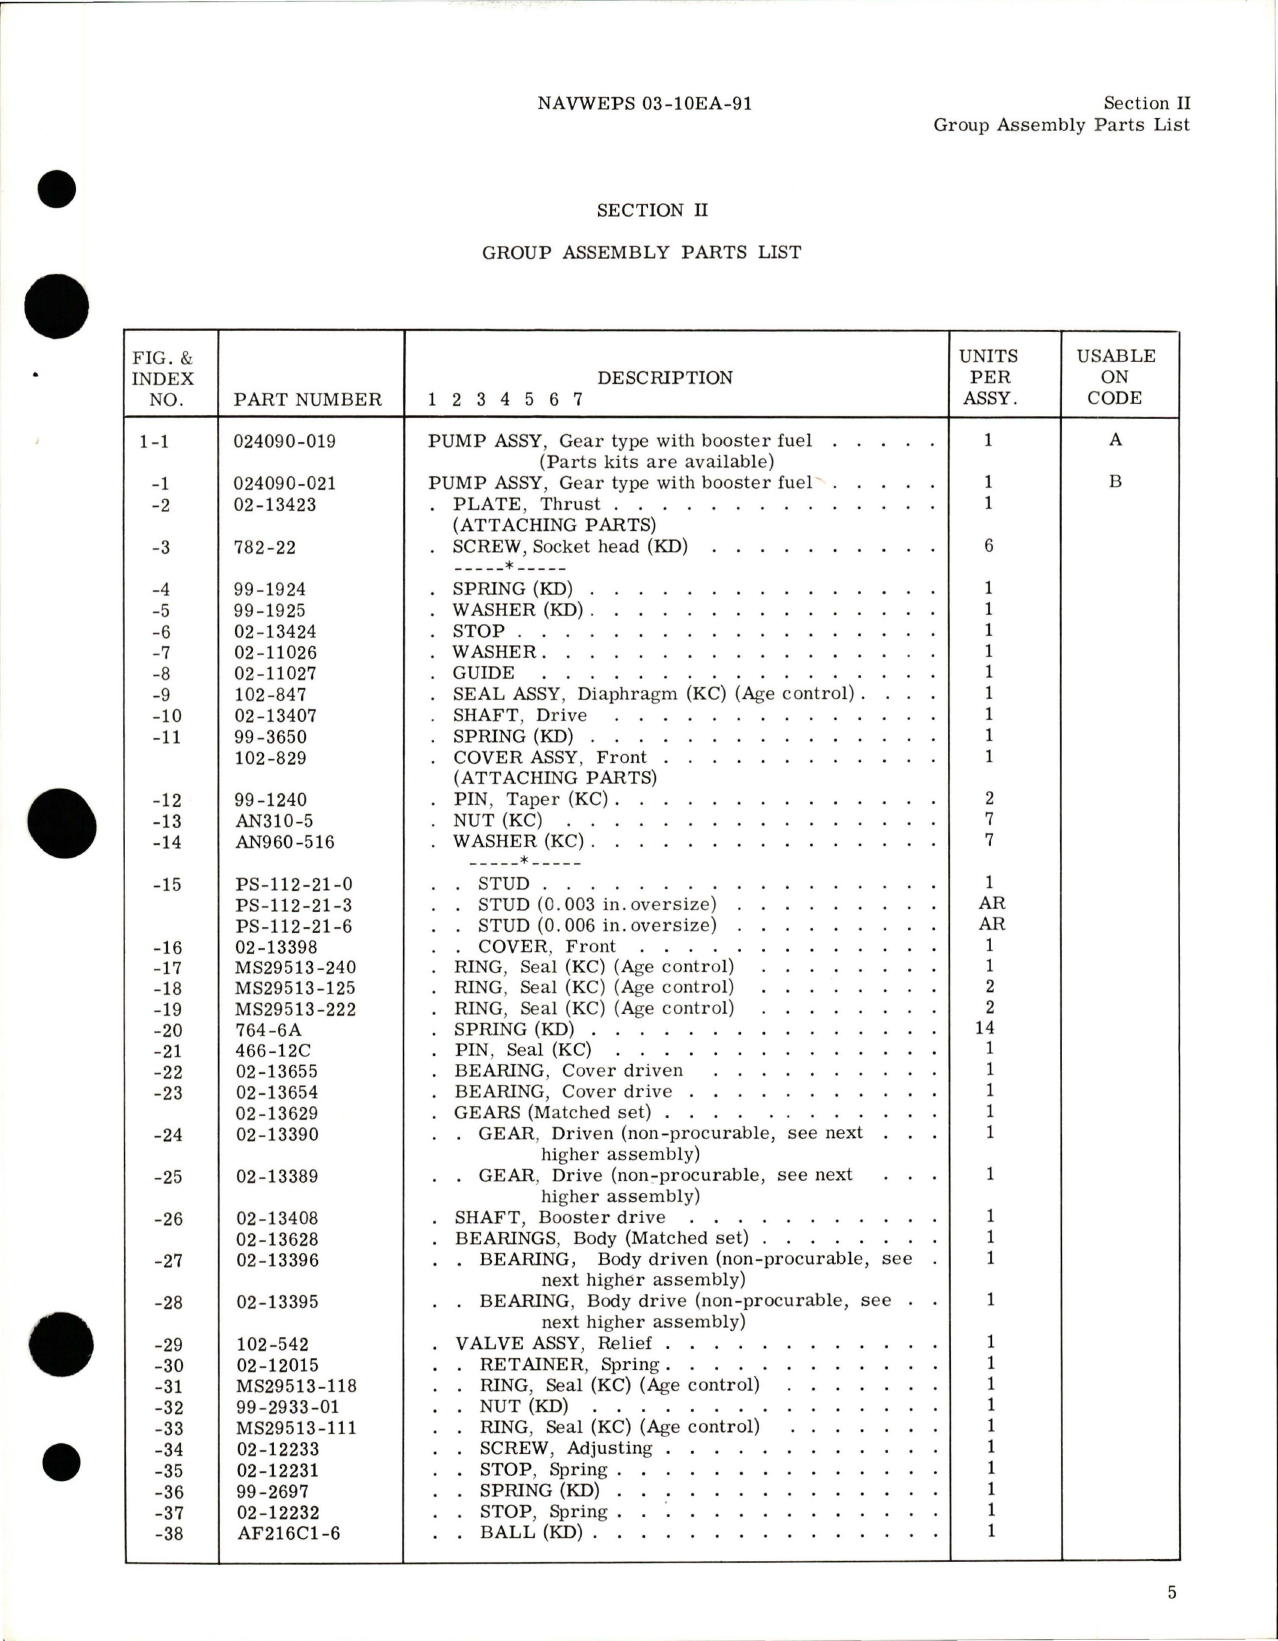 Sample page 7 from AirCorps Library document: Illustrated Parts Breakdown for Gear Type with Booster Fuel Pump Assembly - Models 024090-019 and 024090-021